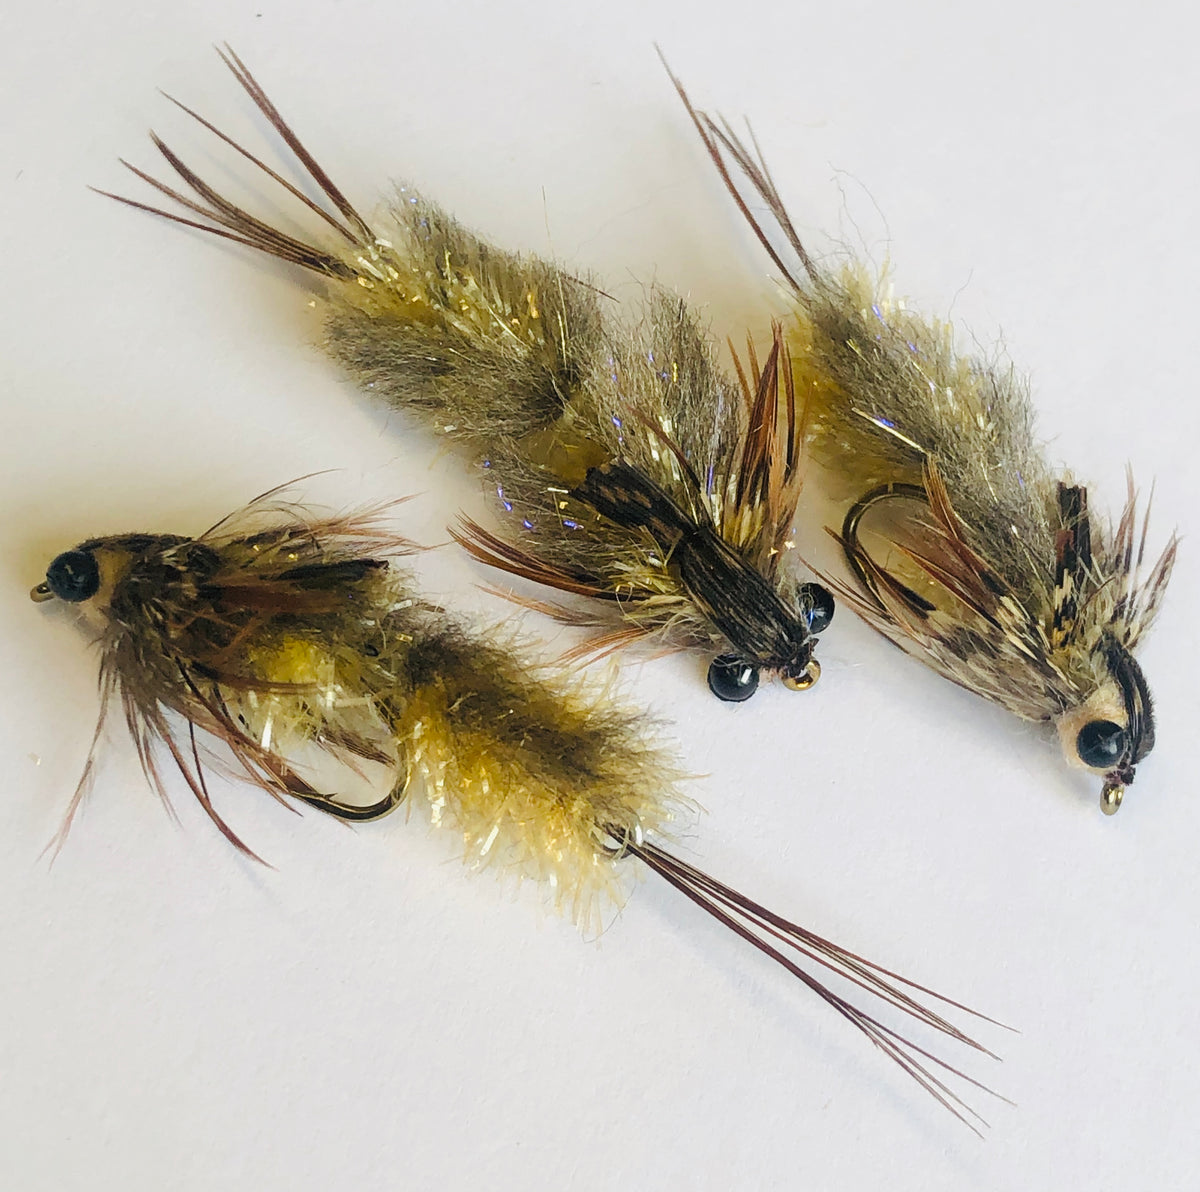 Nymph, Fly fishing nymphs, Fly tying